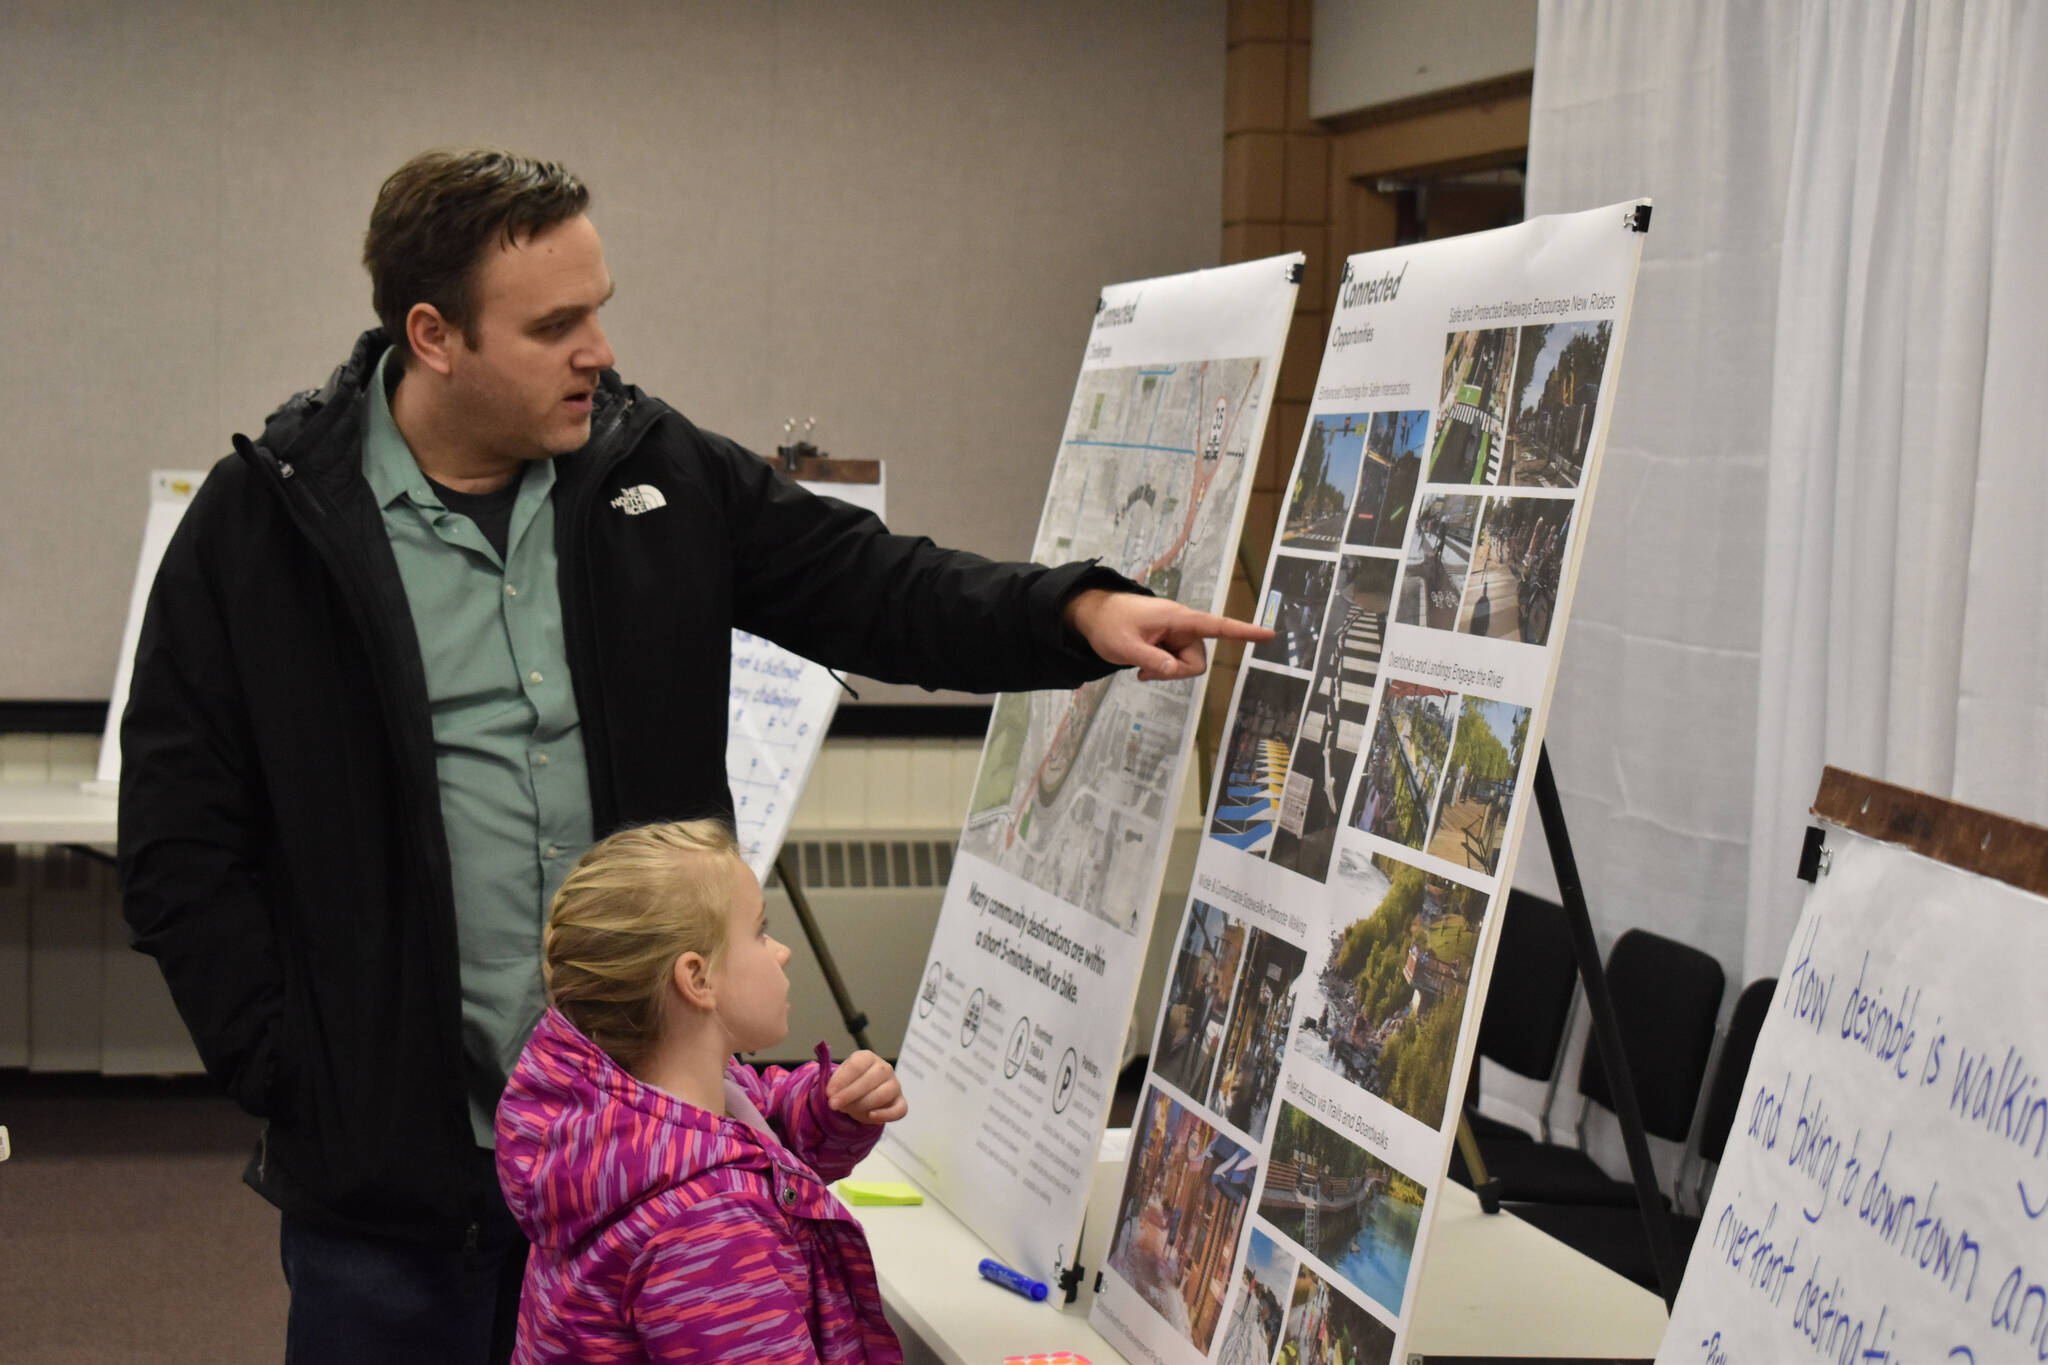 Attendees examine concept boards on Thursday, Jan. 12, 2023, at the Soldotna Riverfront Redevelopment Open House at the Soldotna Regional Sports Complex in Soldotna, Alaska. (Jake Dye/Peninsula Clarion)